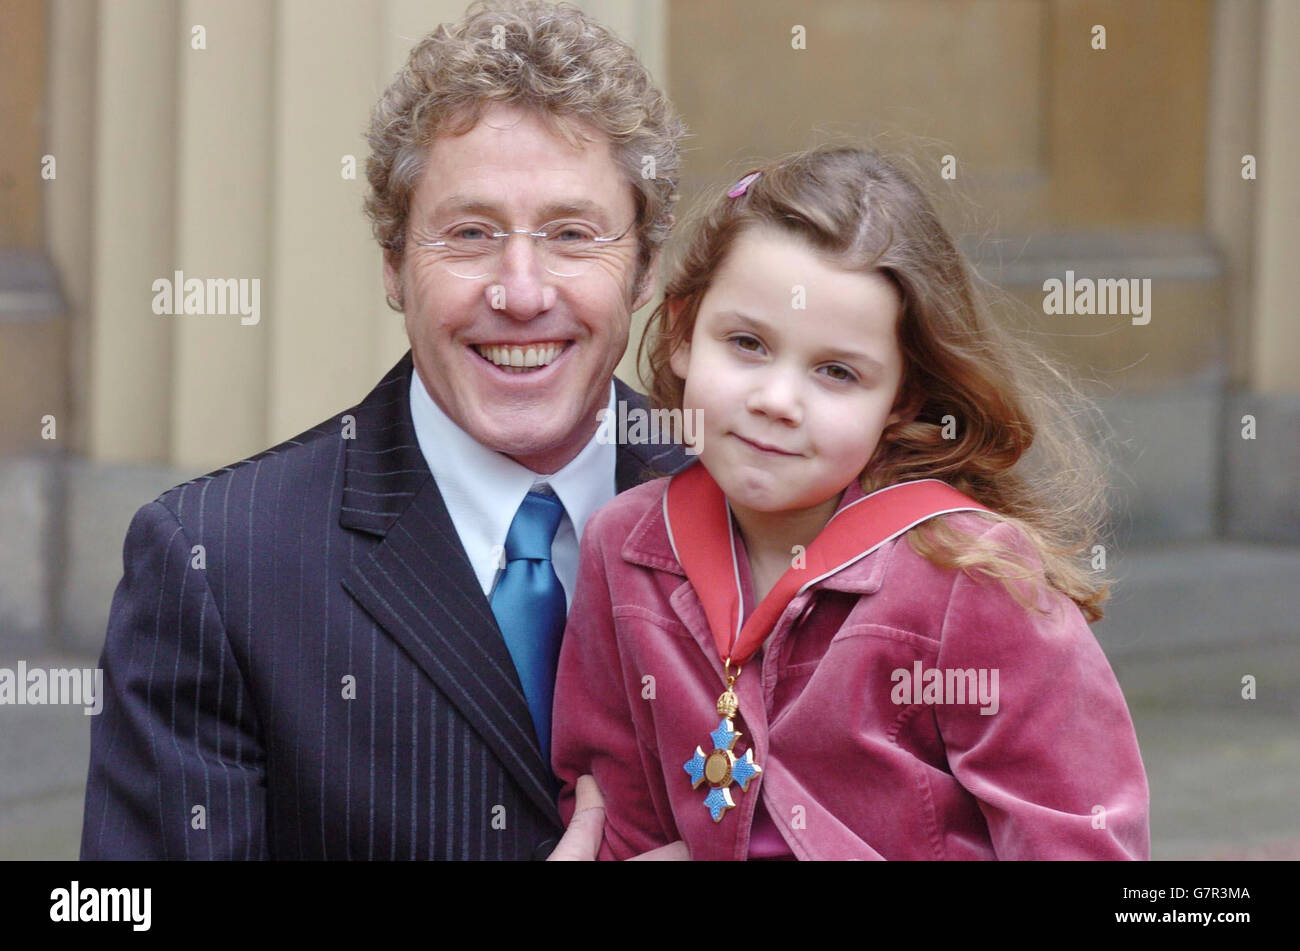 Roger Daltrey from the The Who poses with his grand-daughter Lily, 6. The singer had just been honoured as a Commander of the British Empire (CBE) for services to music. Stock Photo